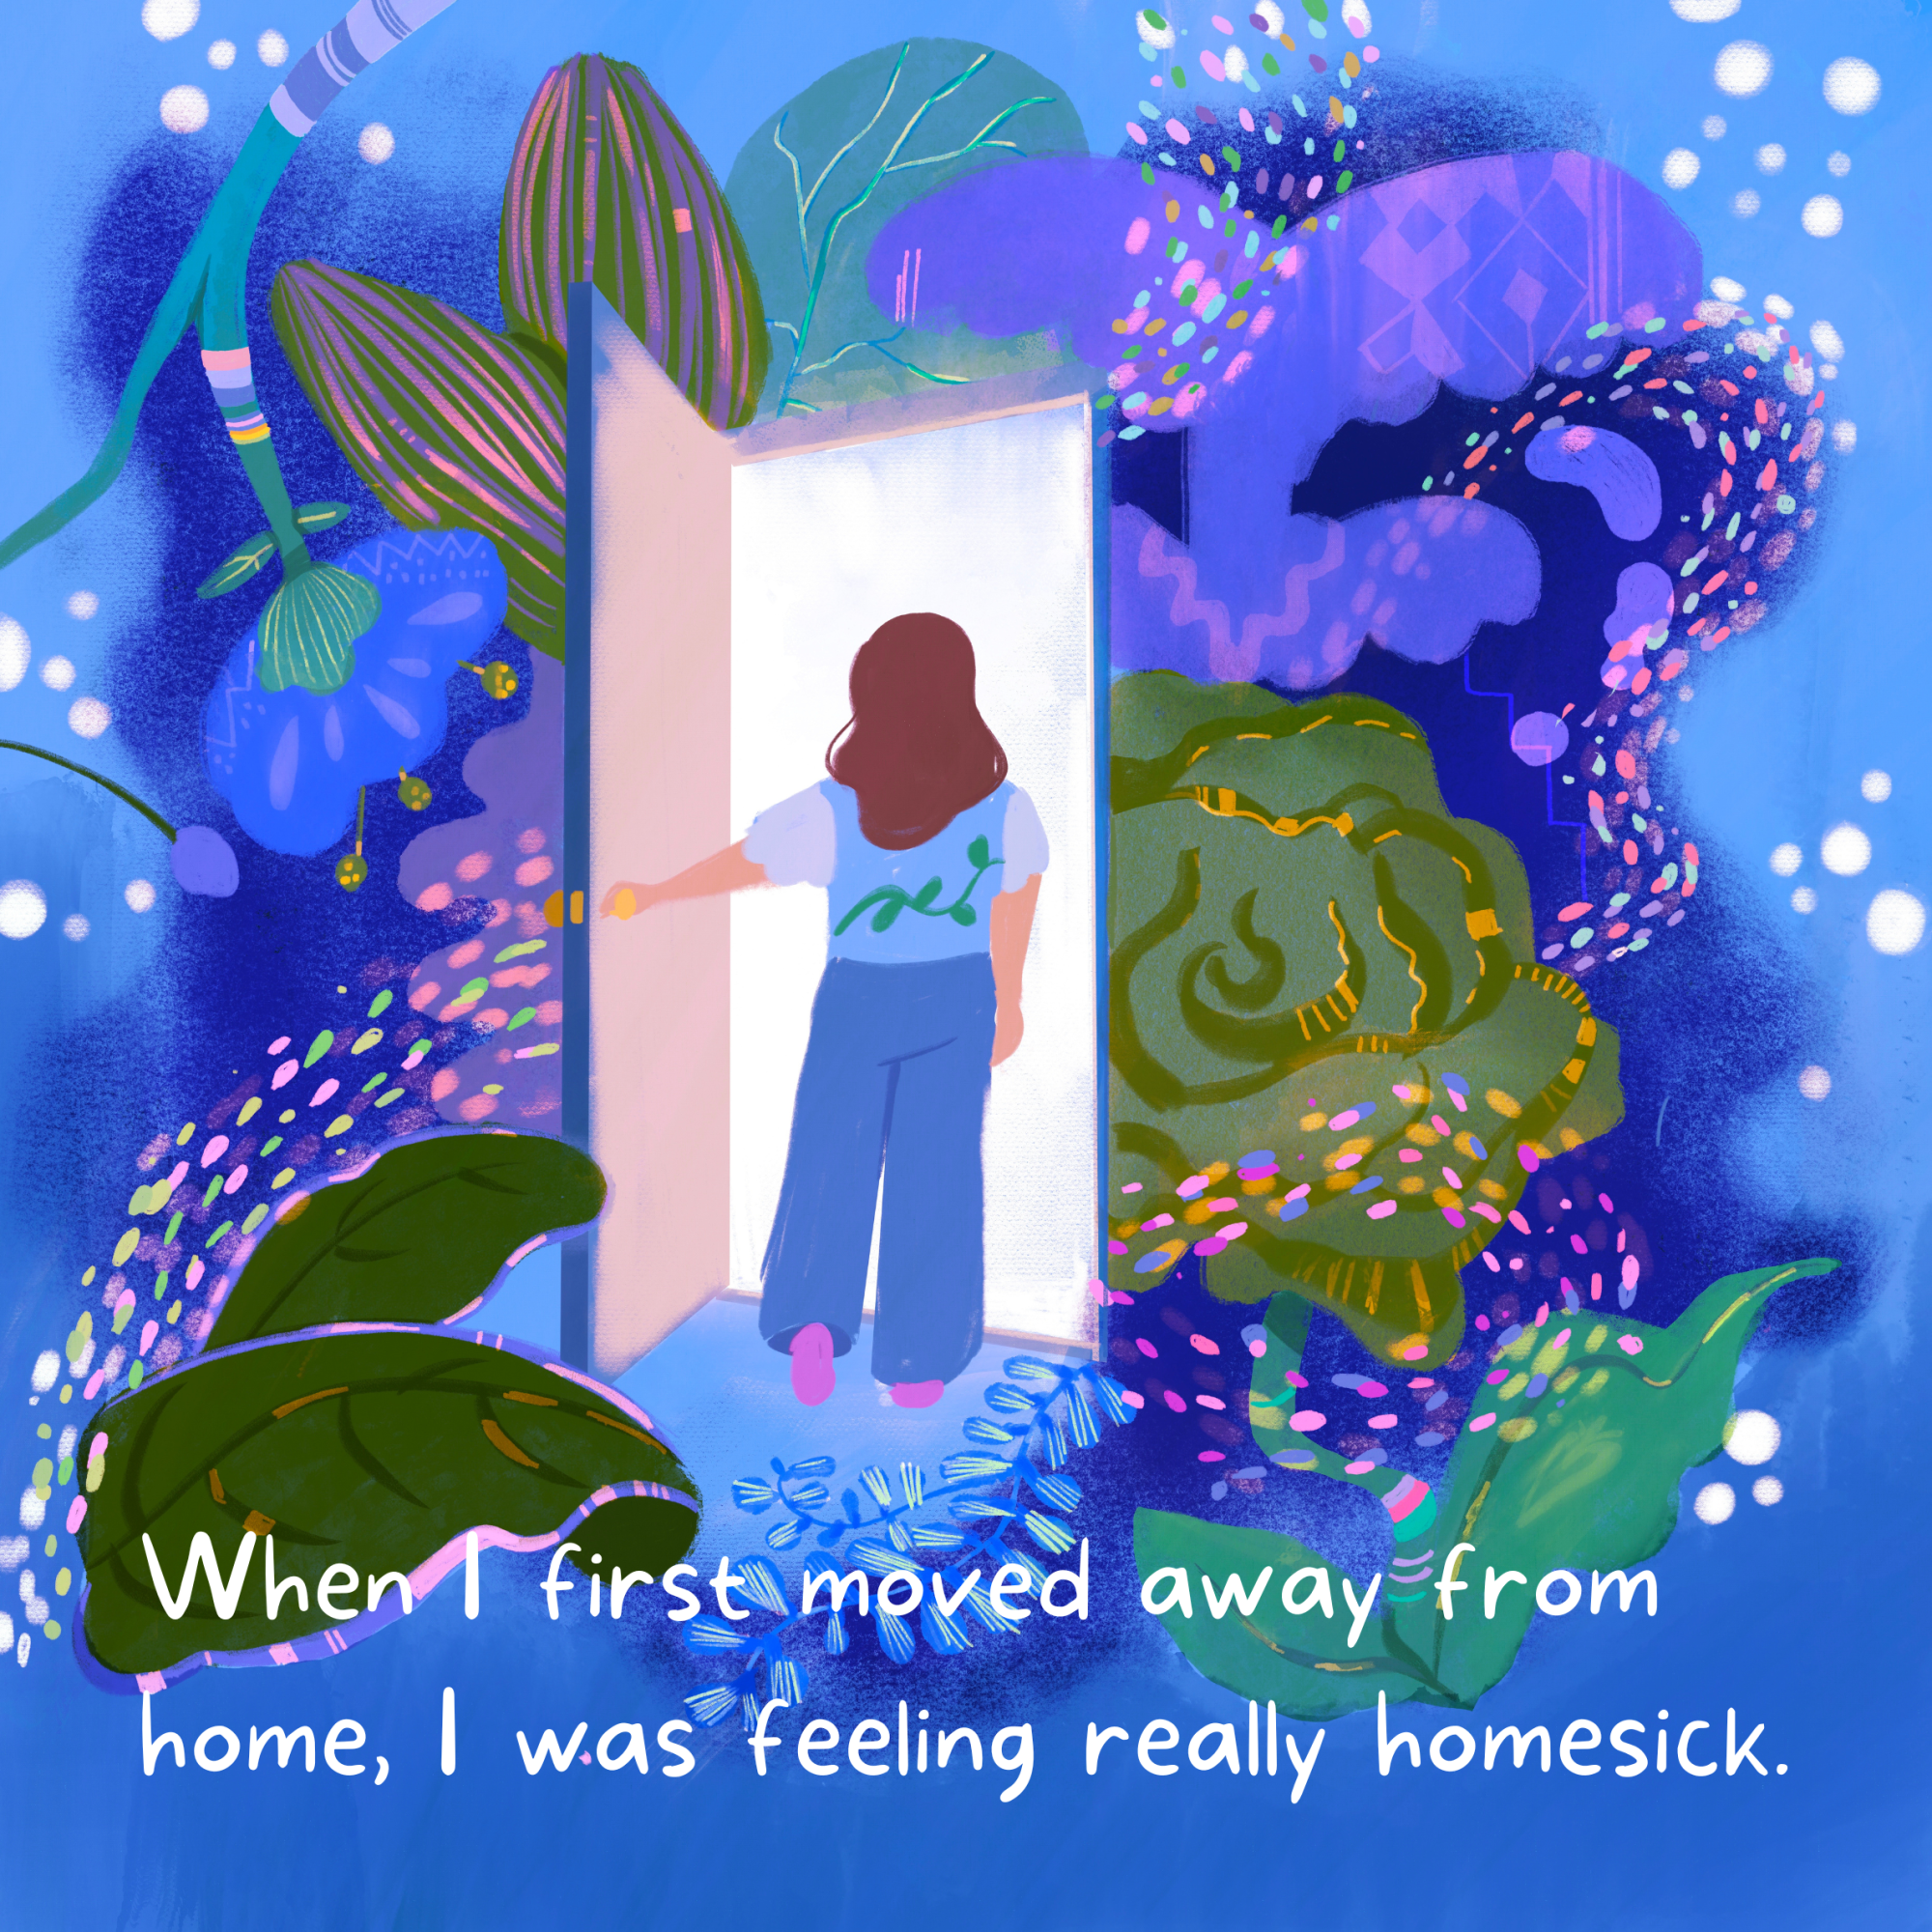 An illustration of a person in a doorway with the sentence: When I first moved away from home, I was feeling really homesick.